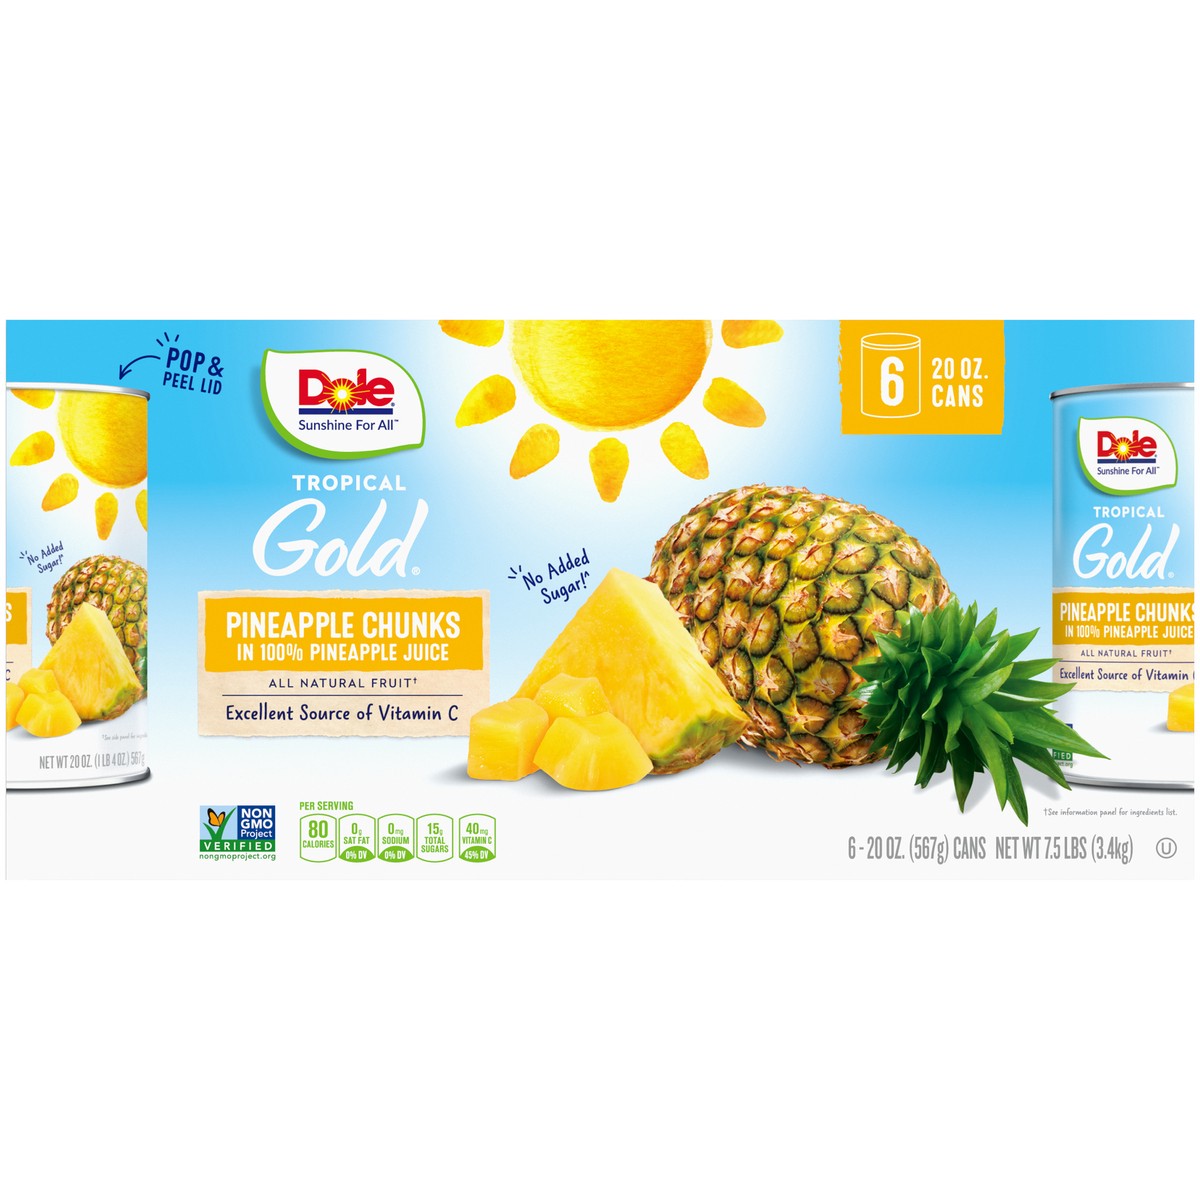 slide 6 of 9, Dole Tropical Gold Pineapple Chunks in 100% Pineapple Juice 6-20 oz. Cans, 7.5 lb